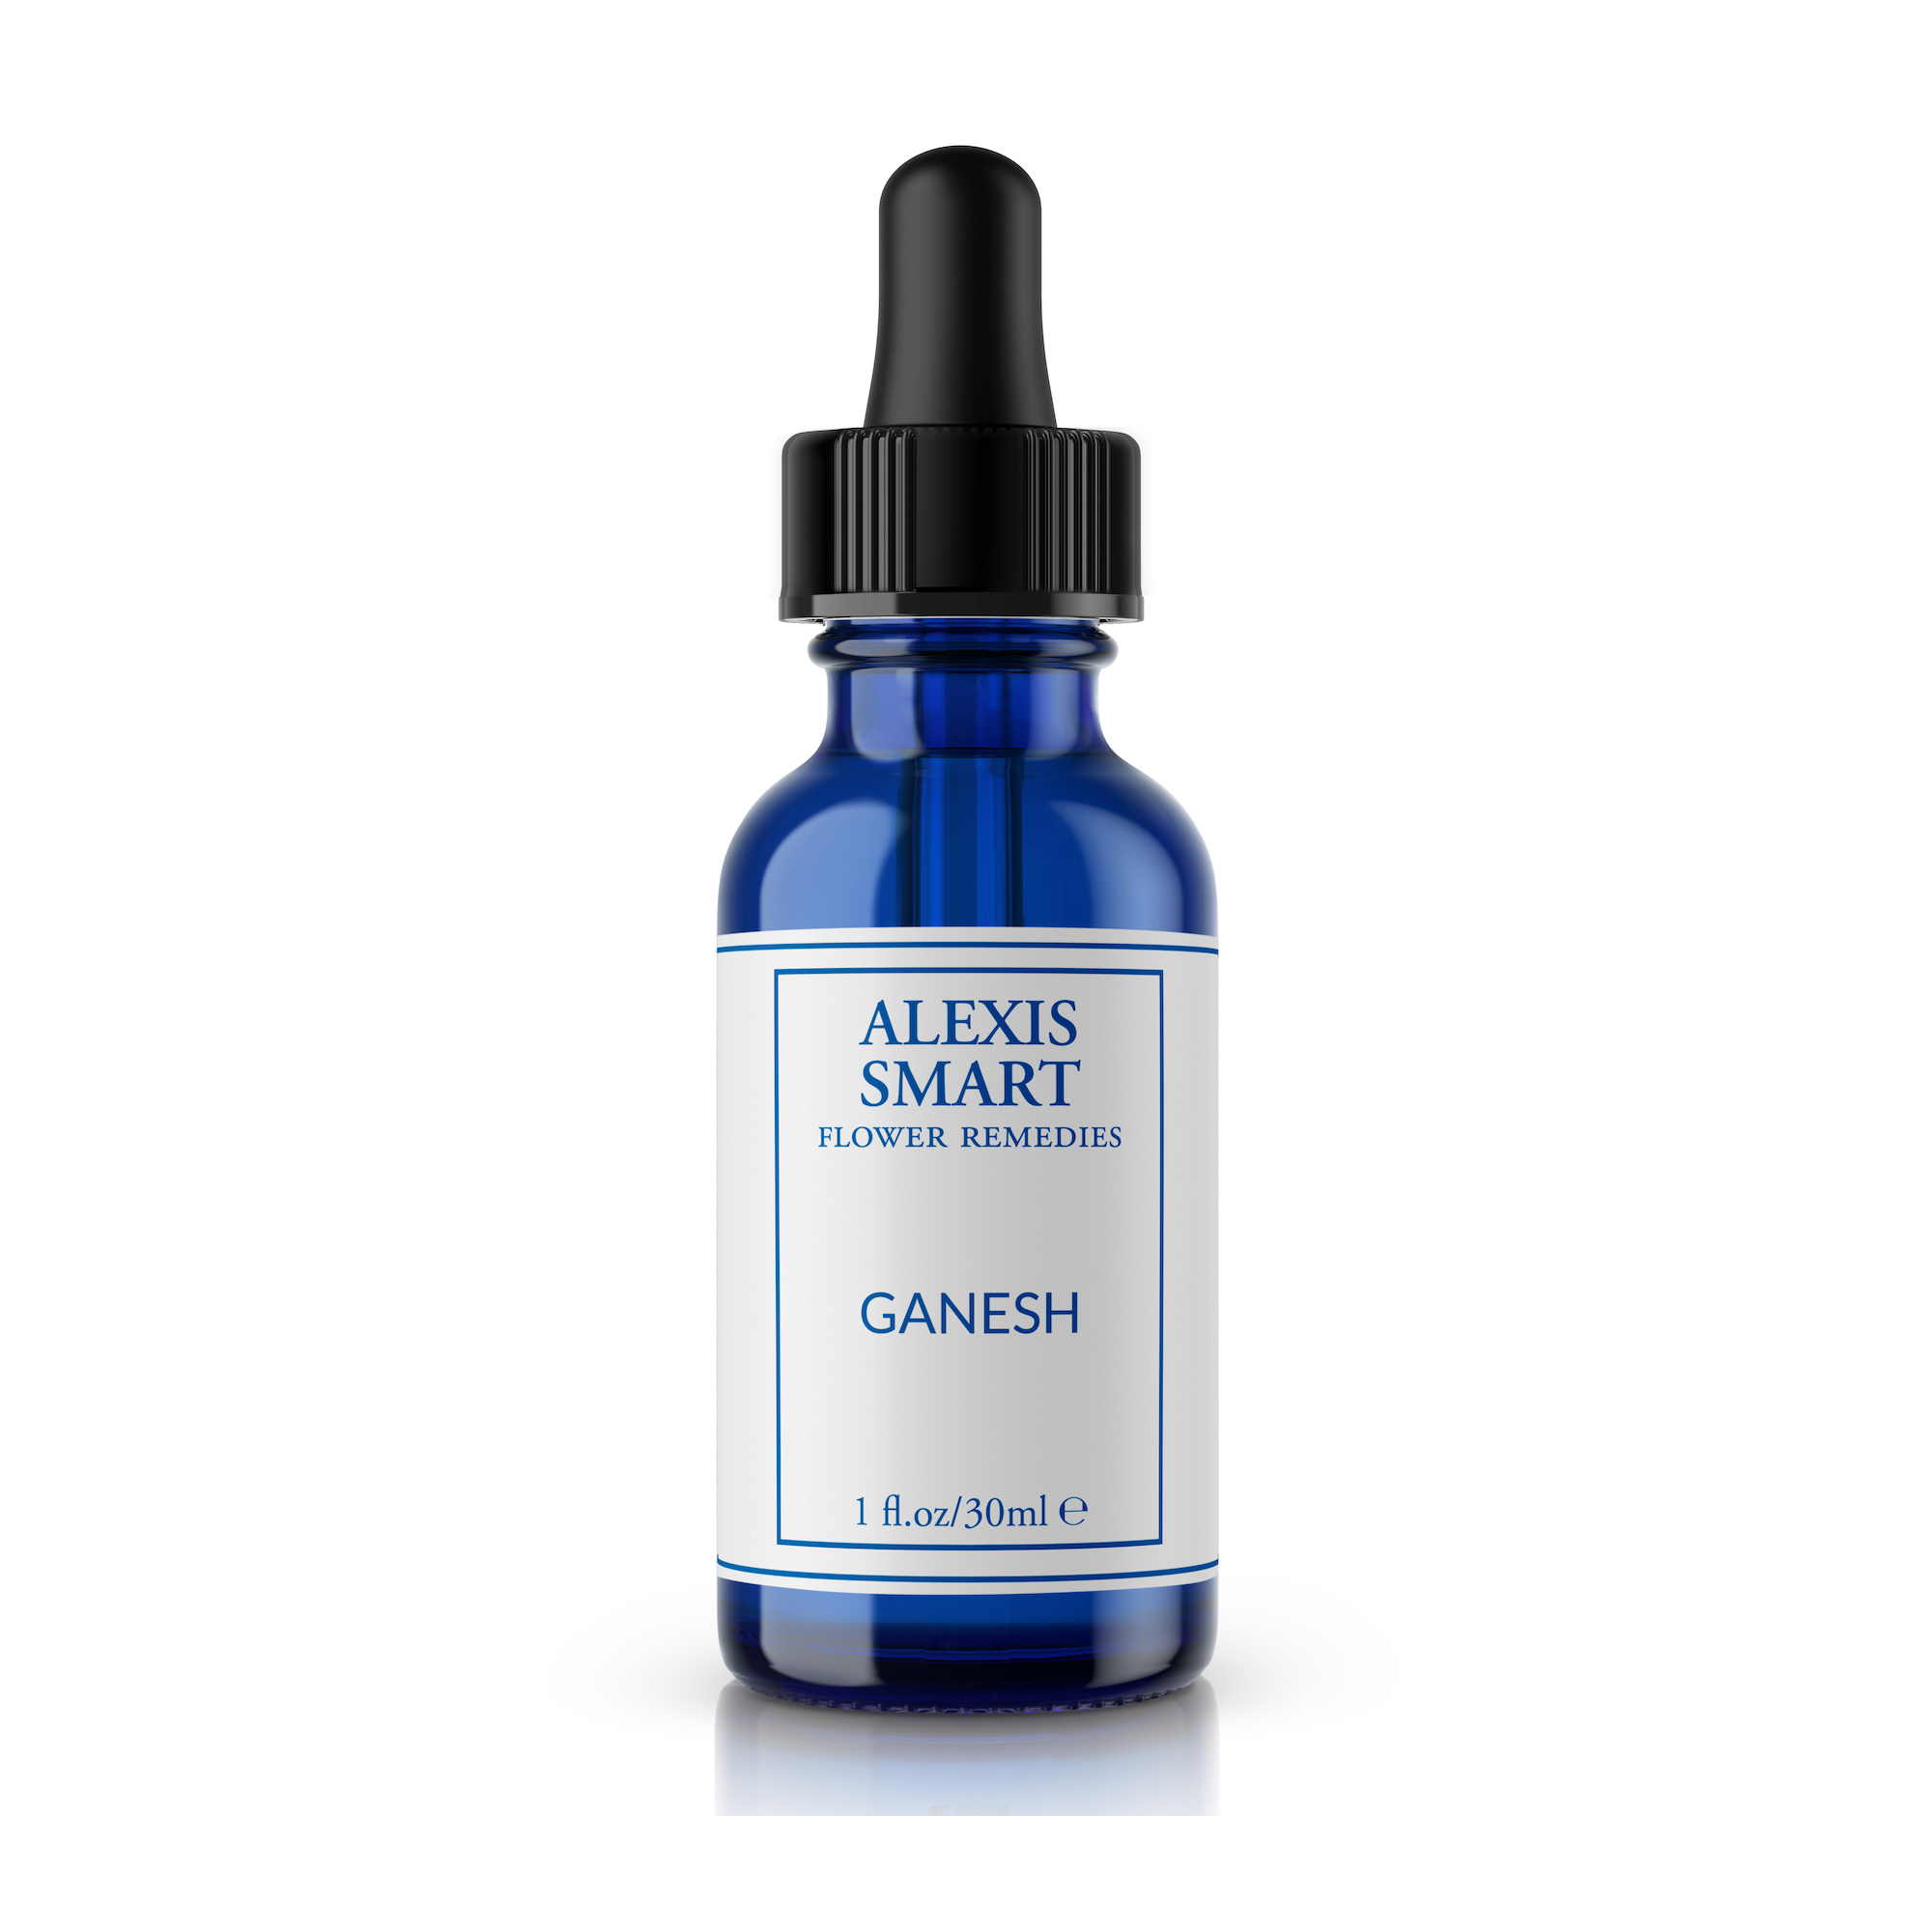 A 30ml bottle of flower remedy that helps with creative blocks, inspiration and confidence.